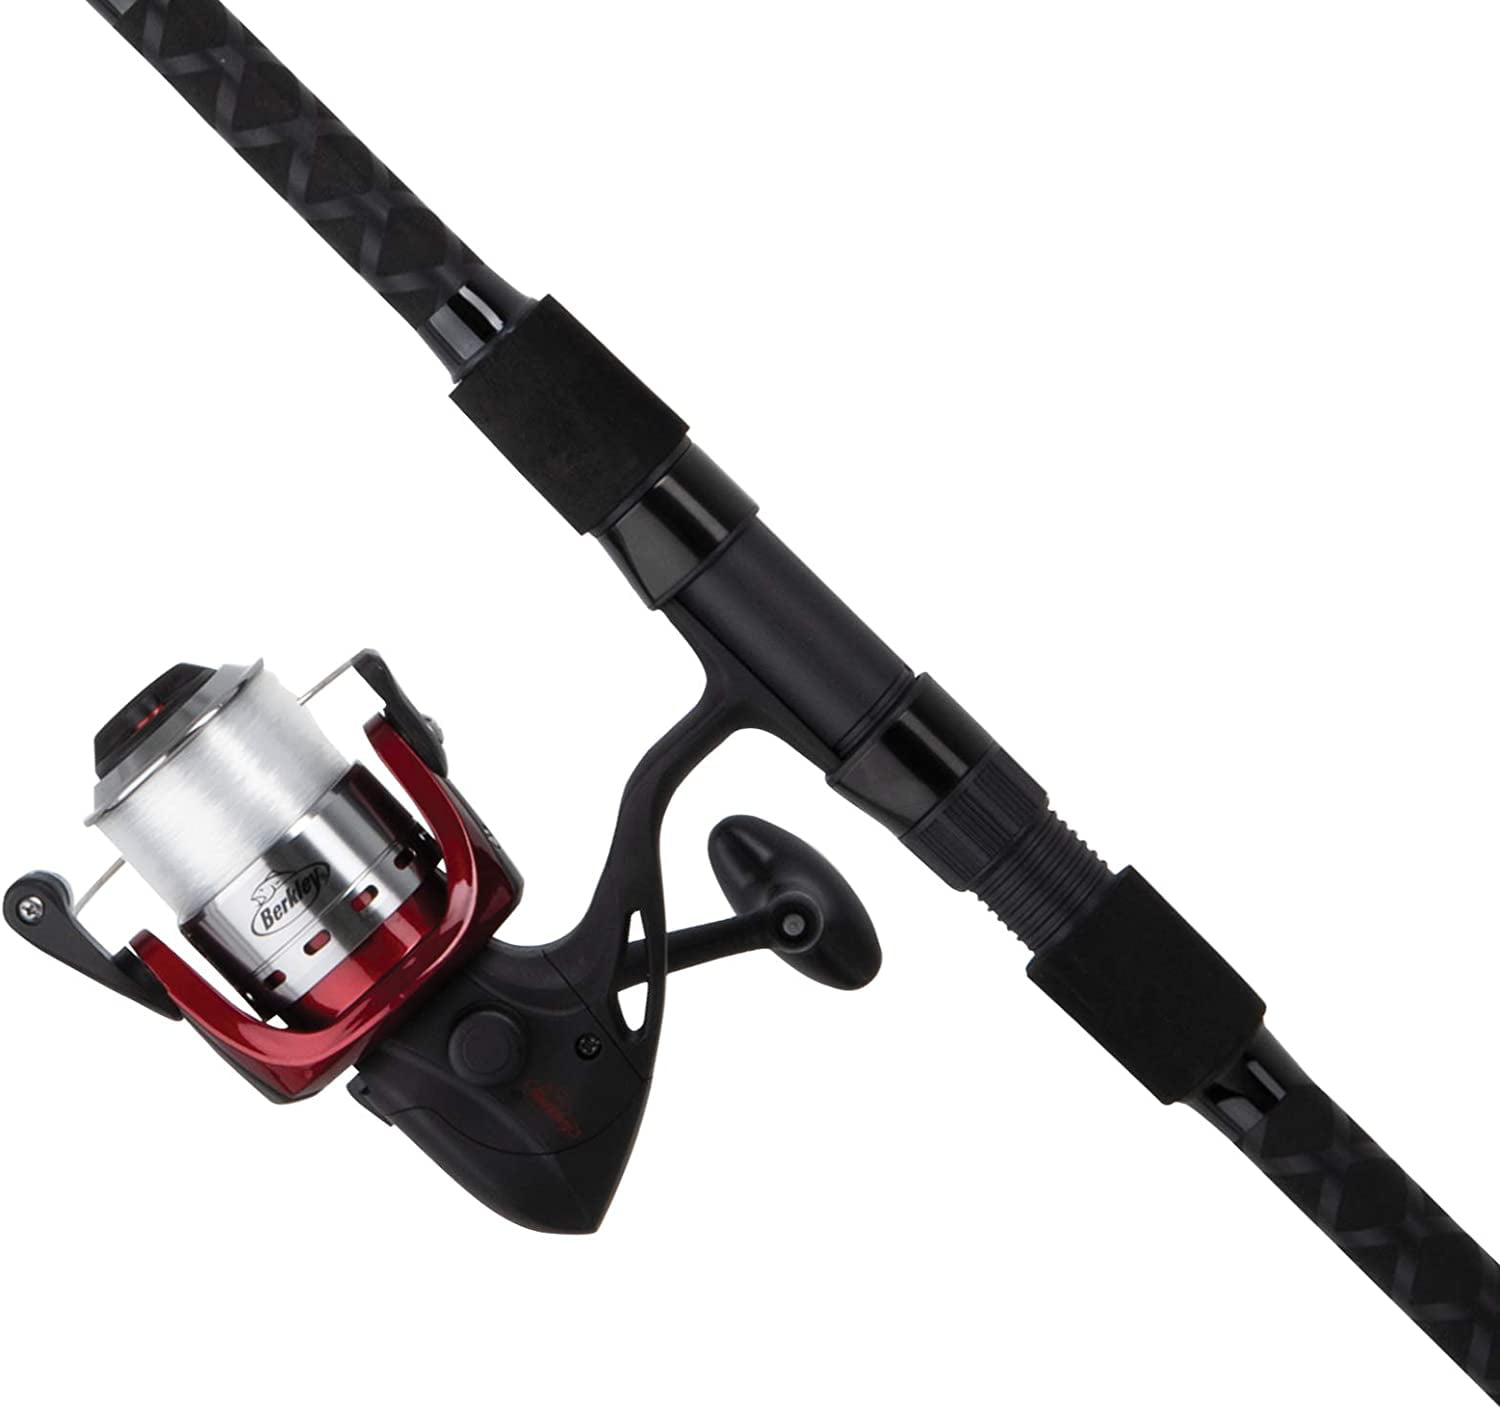 Spartan Glow Surf Rod and Reel